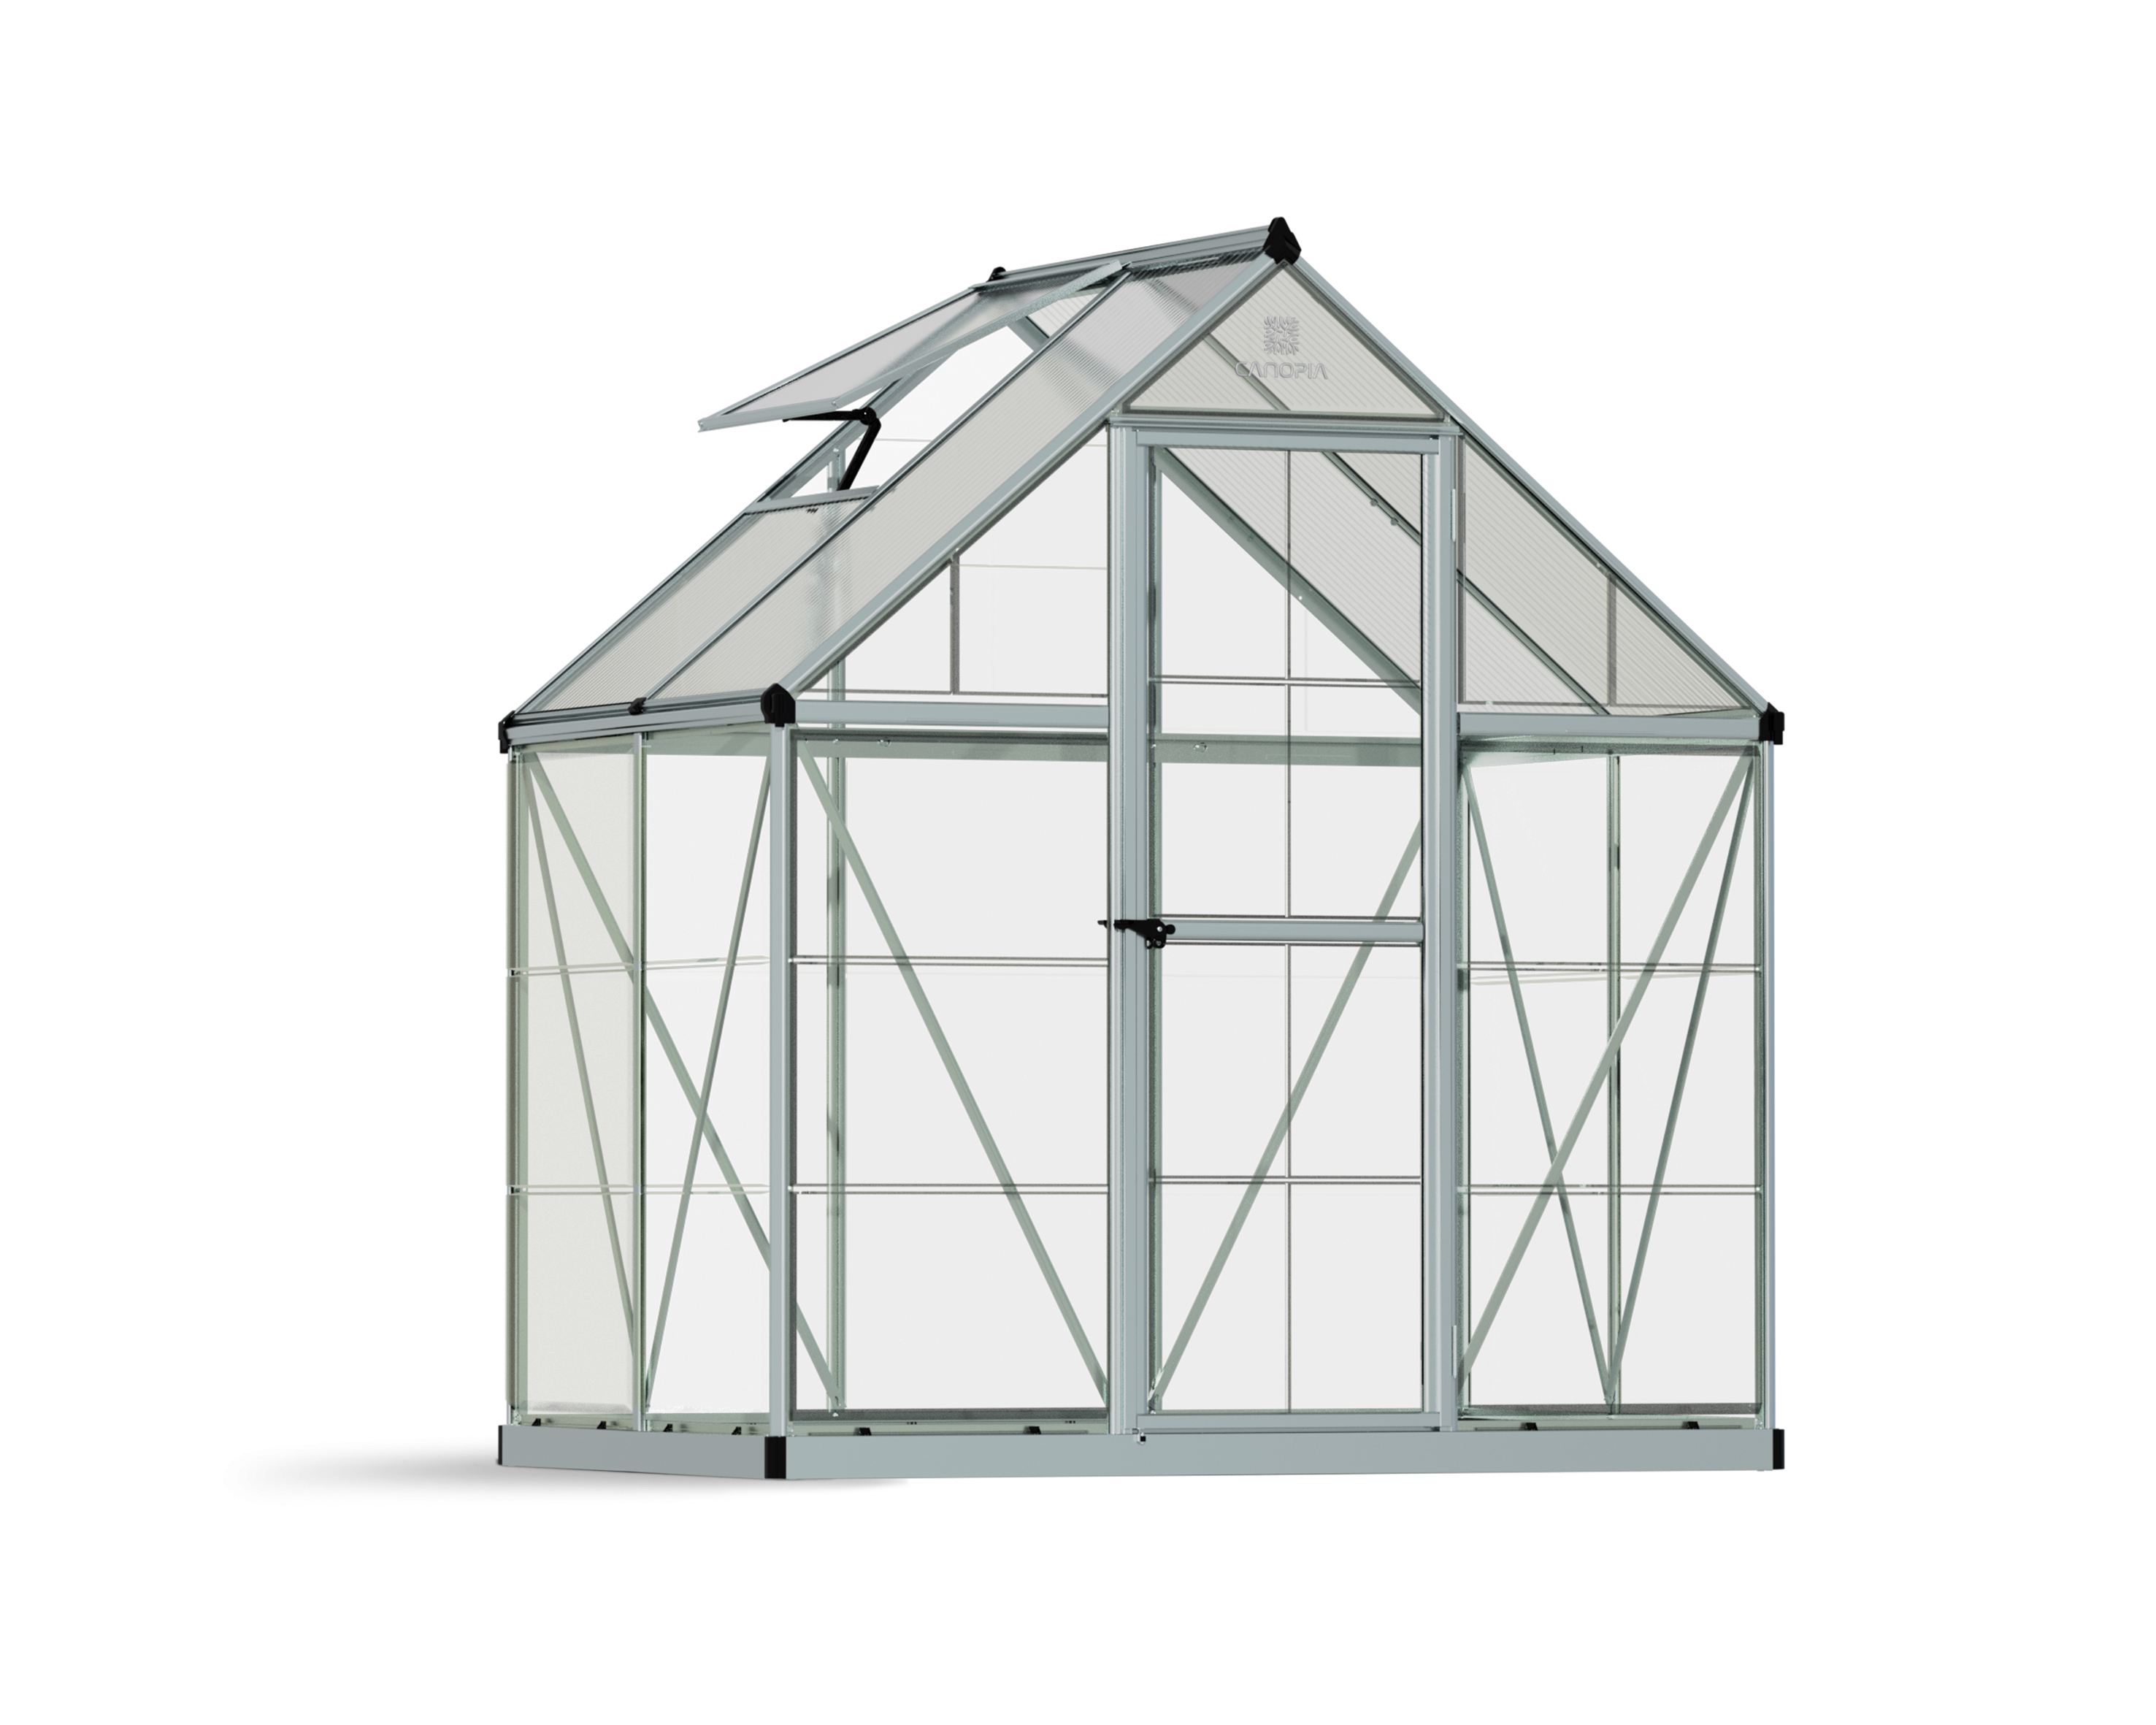 Palram - Canopia Hybrid 6' x 4' Polycarbonate/Aluminum Walk-In Greenhouse – Silver - with Roof Vent - image 1 of 12